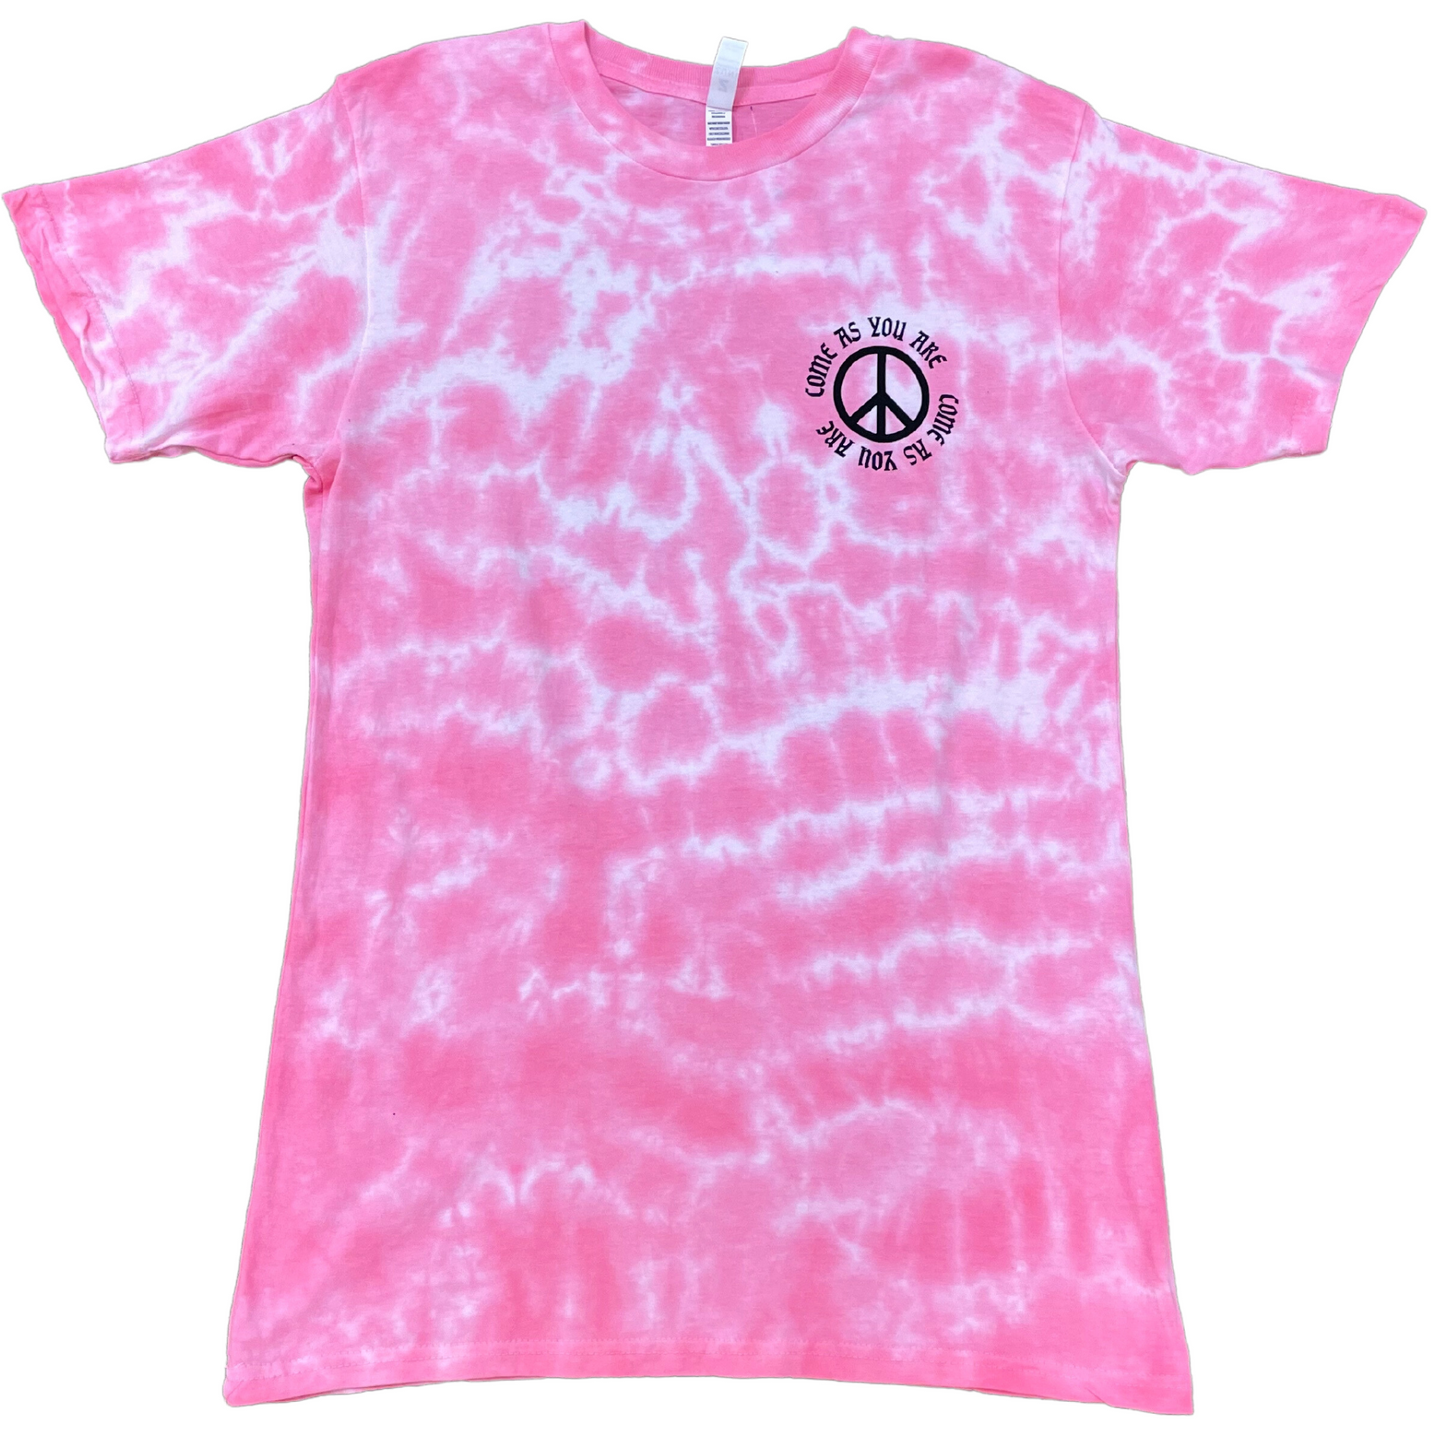 Come as You Are Pink Tie Dye Tee (S-XL)